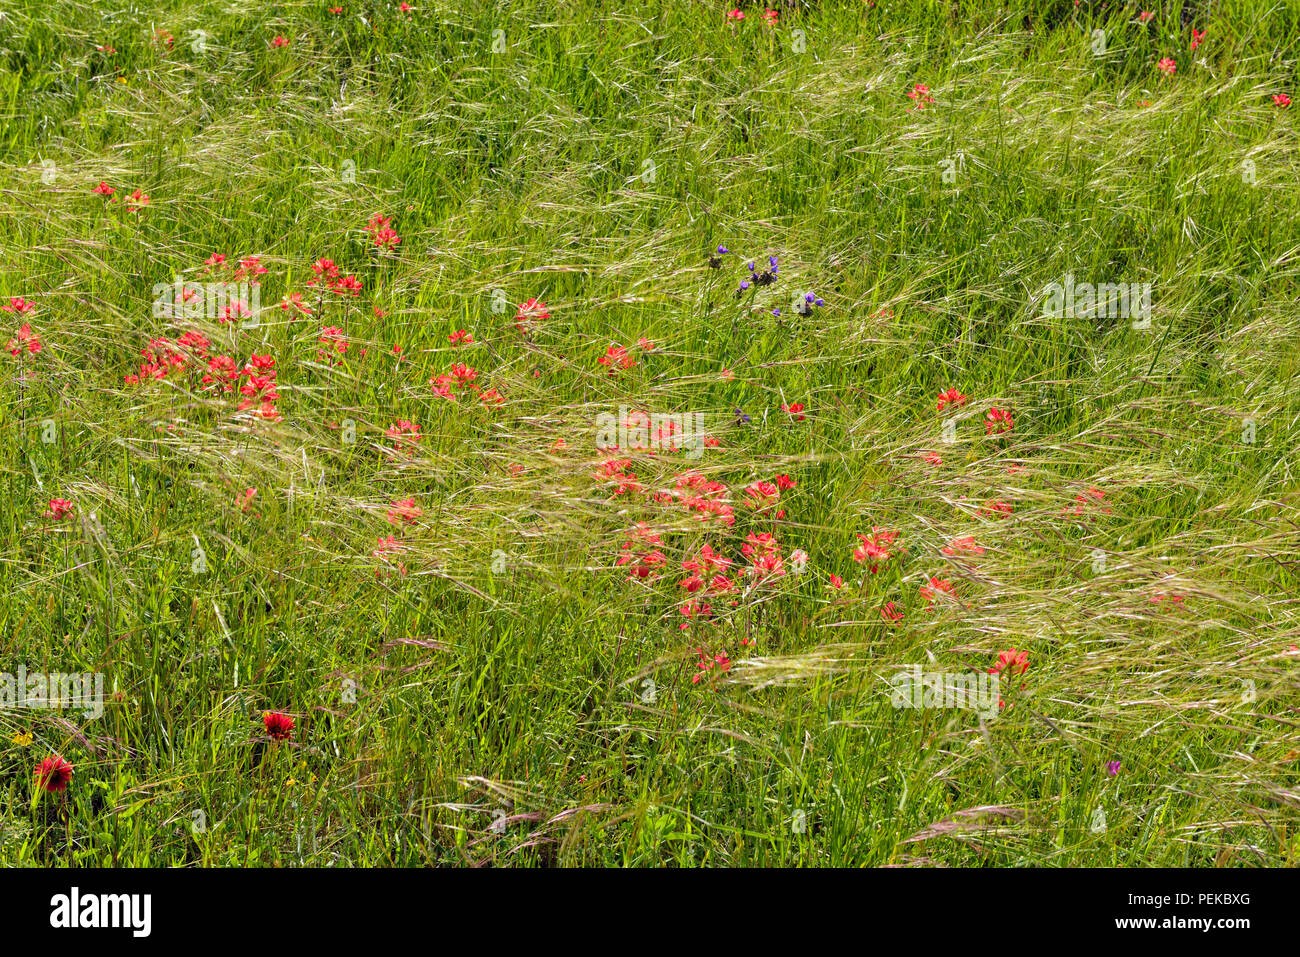 Spring wildflowers- Texas paintbrush and roadside grasses, Burnet County, Texas, USA Stock Photo